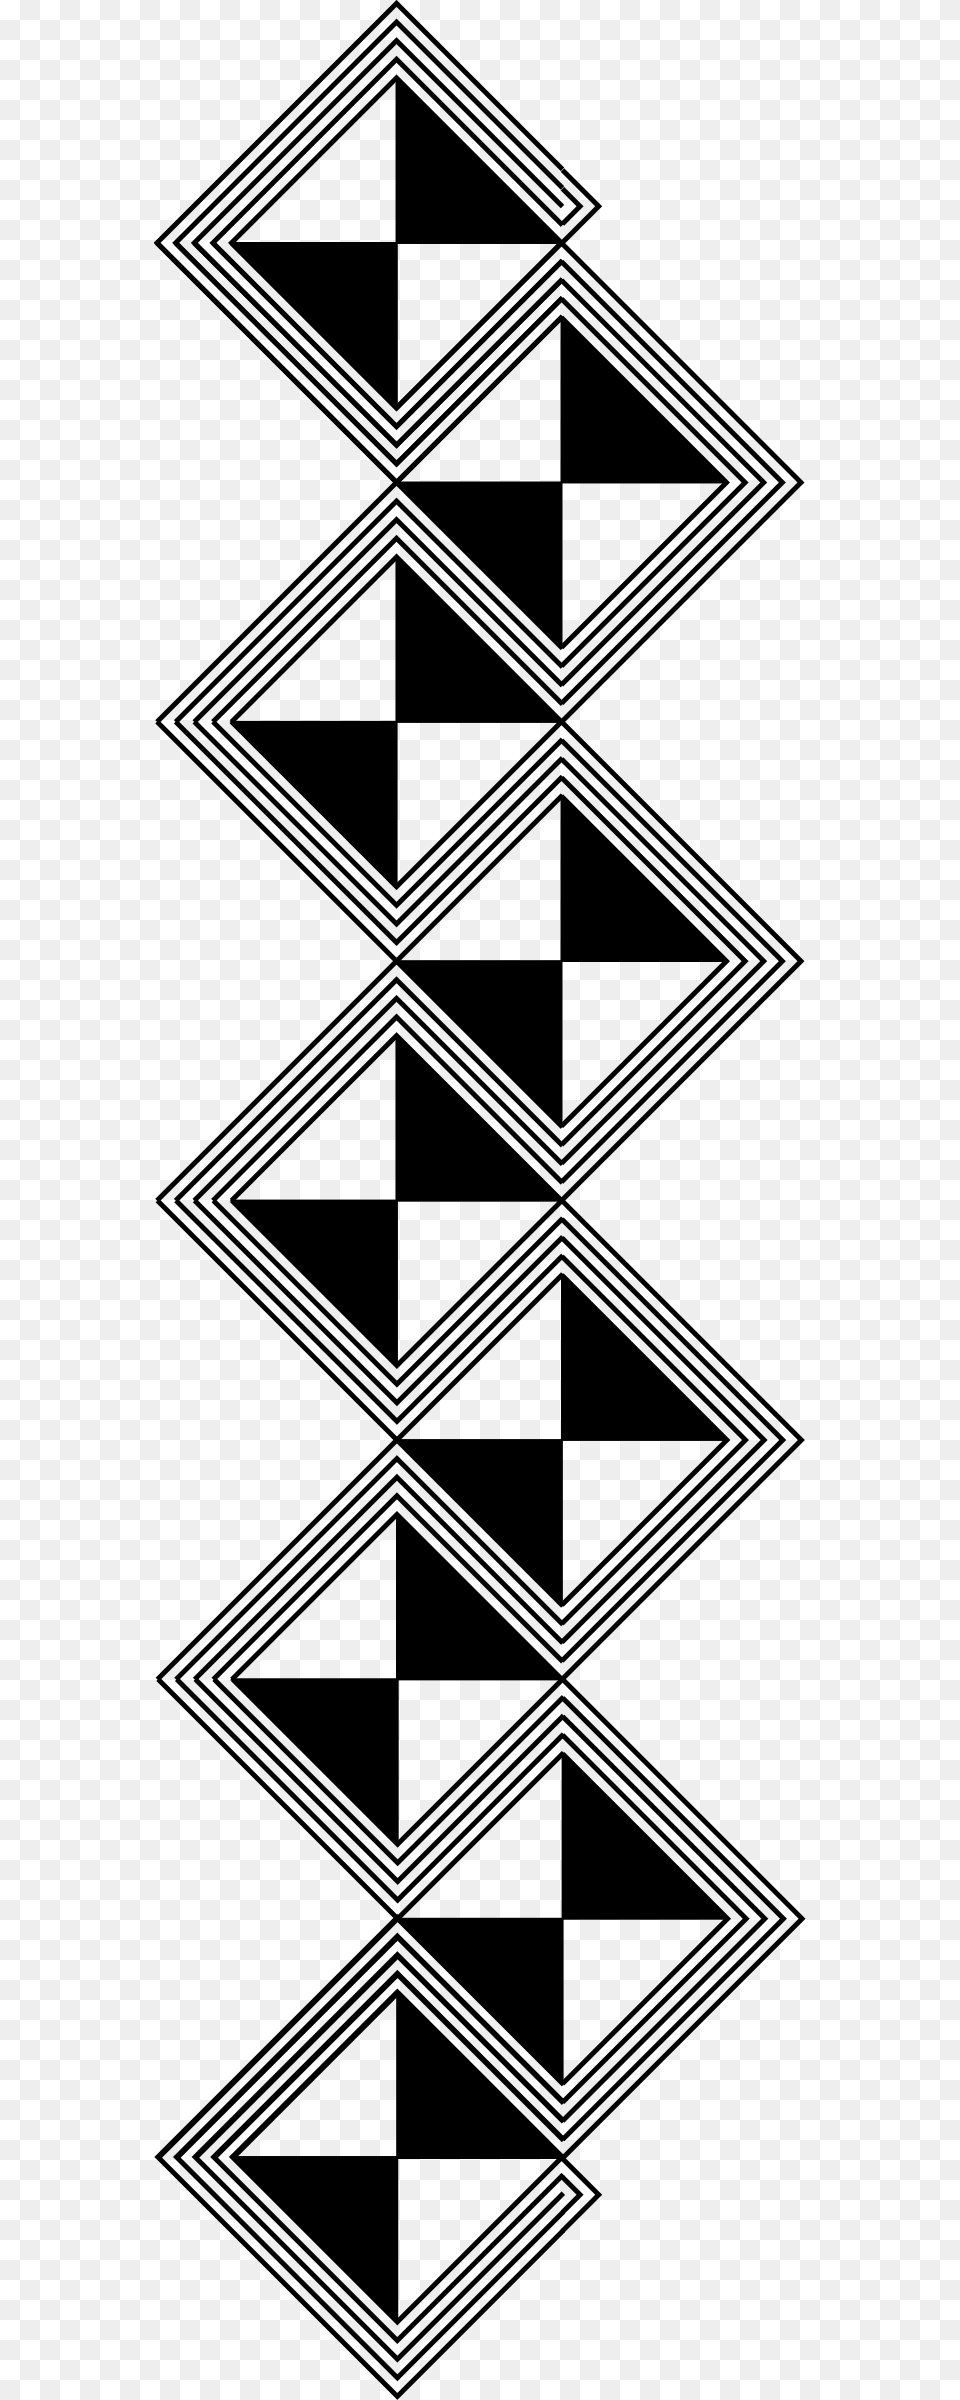 African Vector Patterns Black And White Vertical Line Art Gray Free Transparent Png